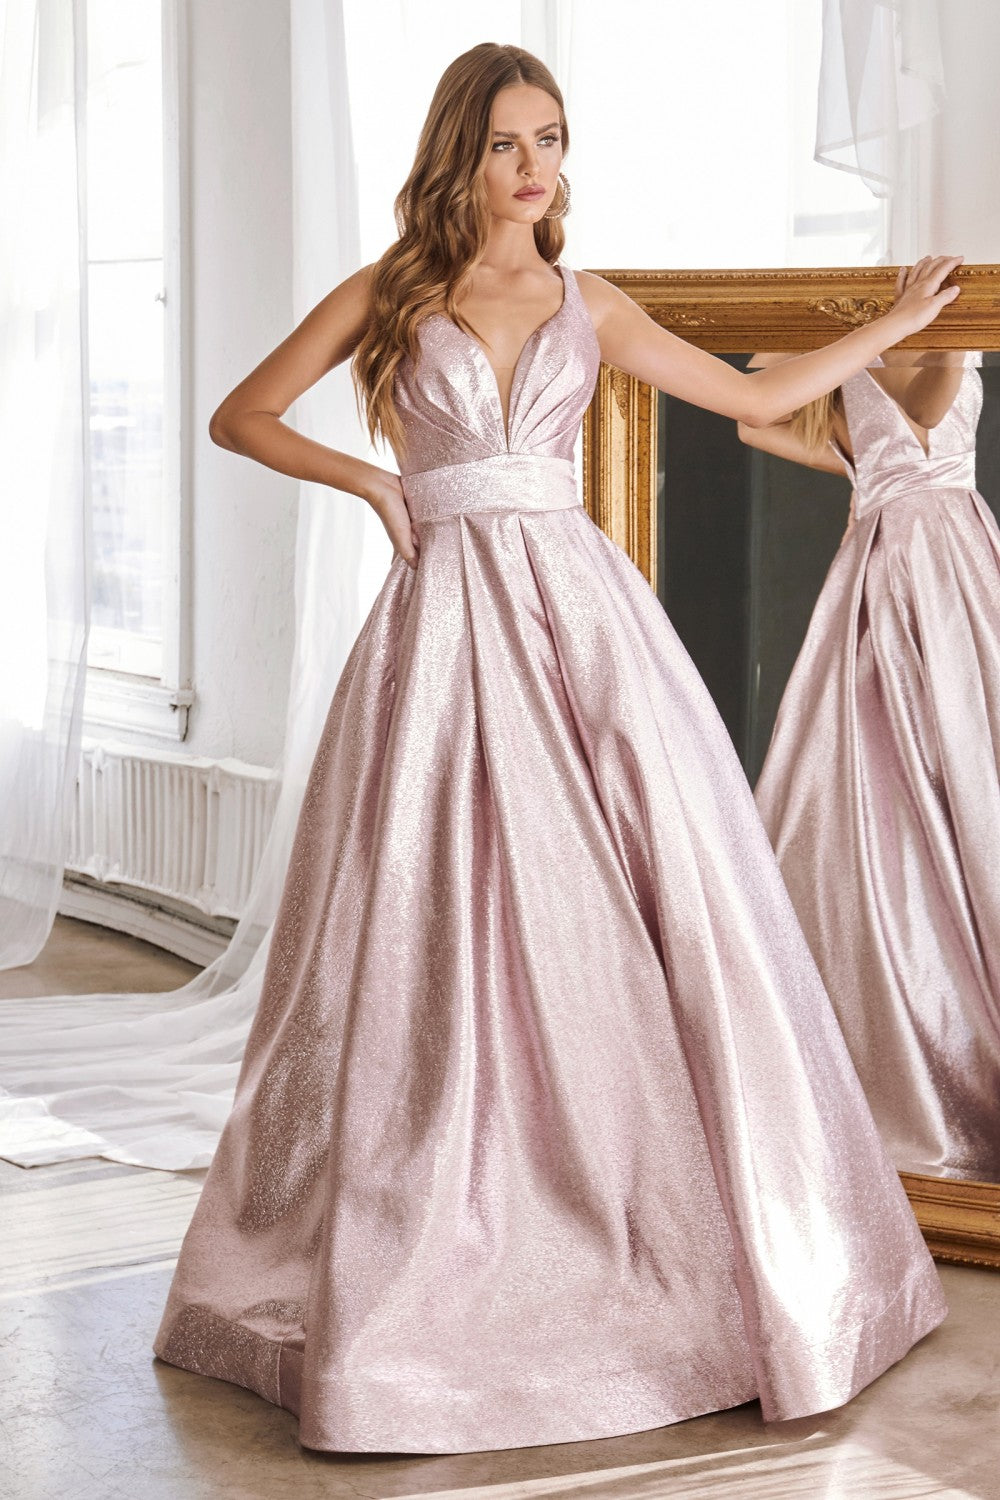 A-line Metallic Prom & Ball Gown Pleated Bustline with V-neck and Pointy Open Back Glittery Princess Skirt with Pockets CDCR850 Elsy Style Prom Dress